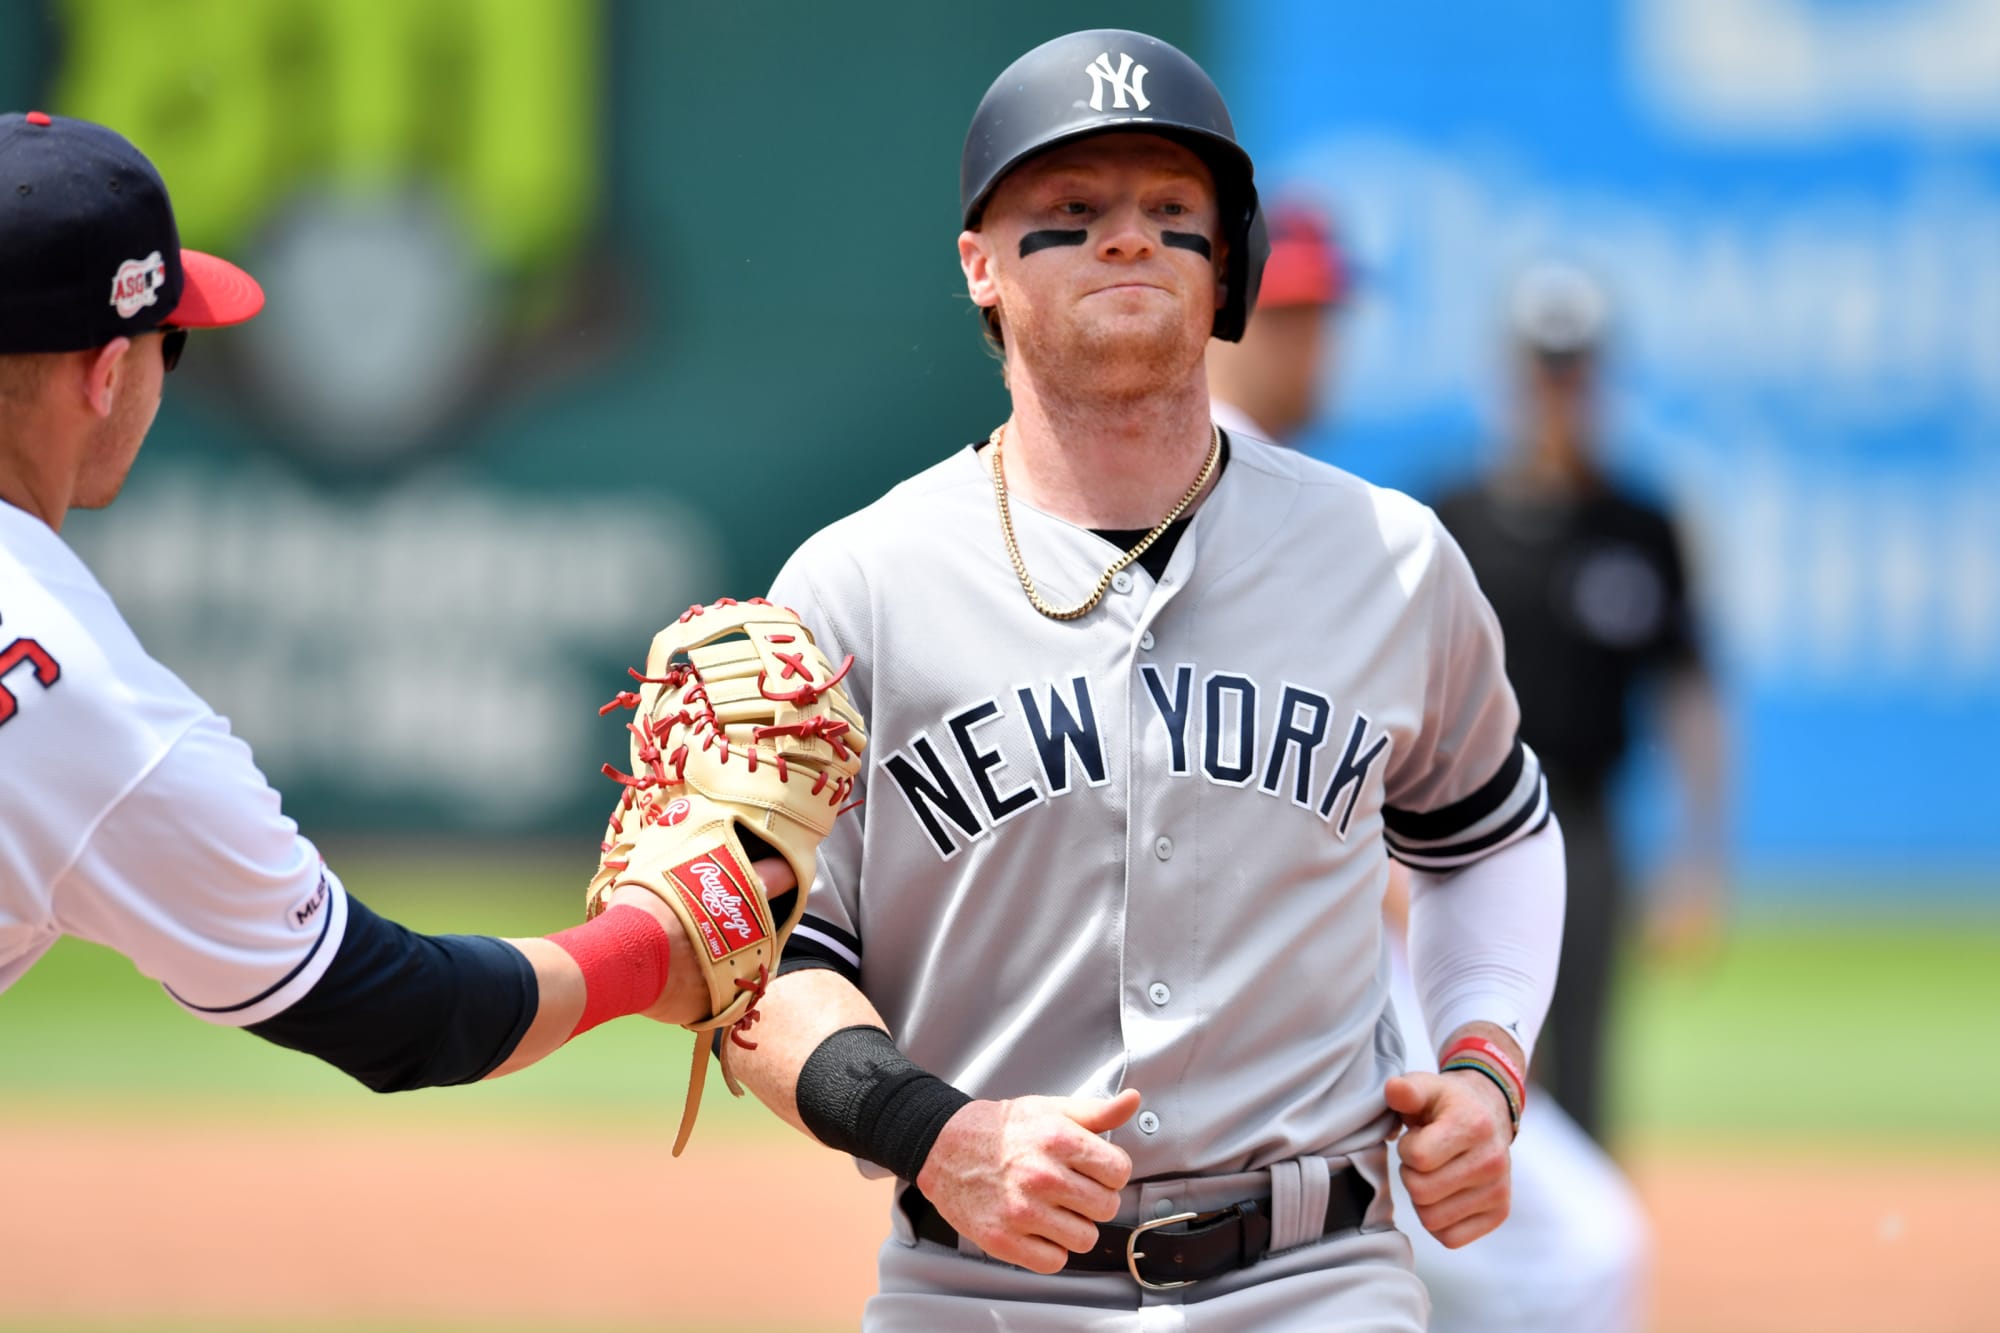 New York Yankees: Clint Frazier is unhappy with current minor league stint